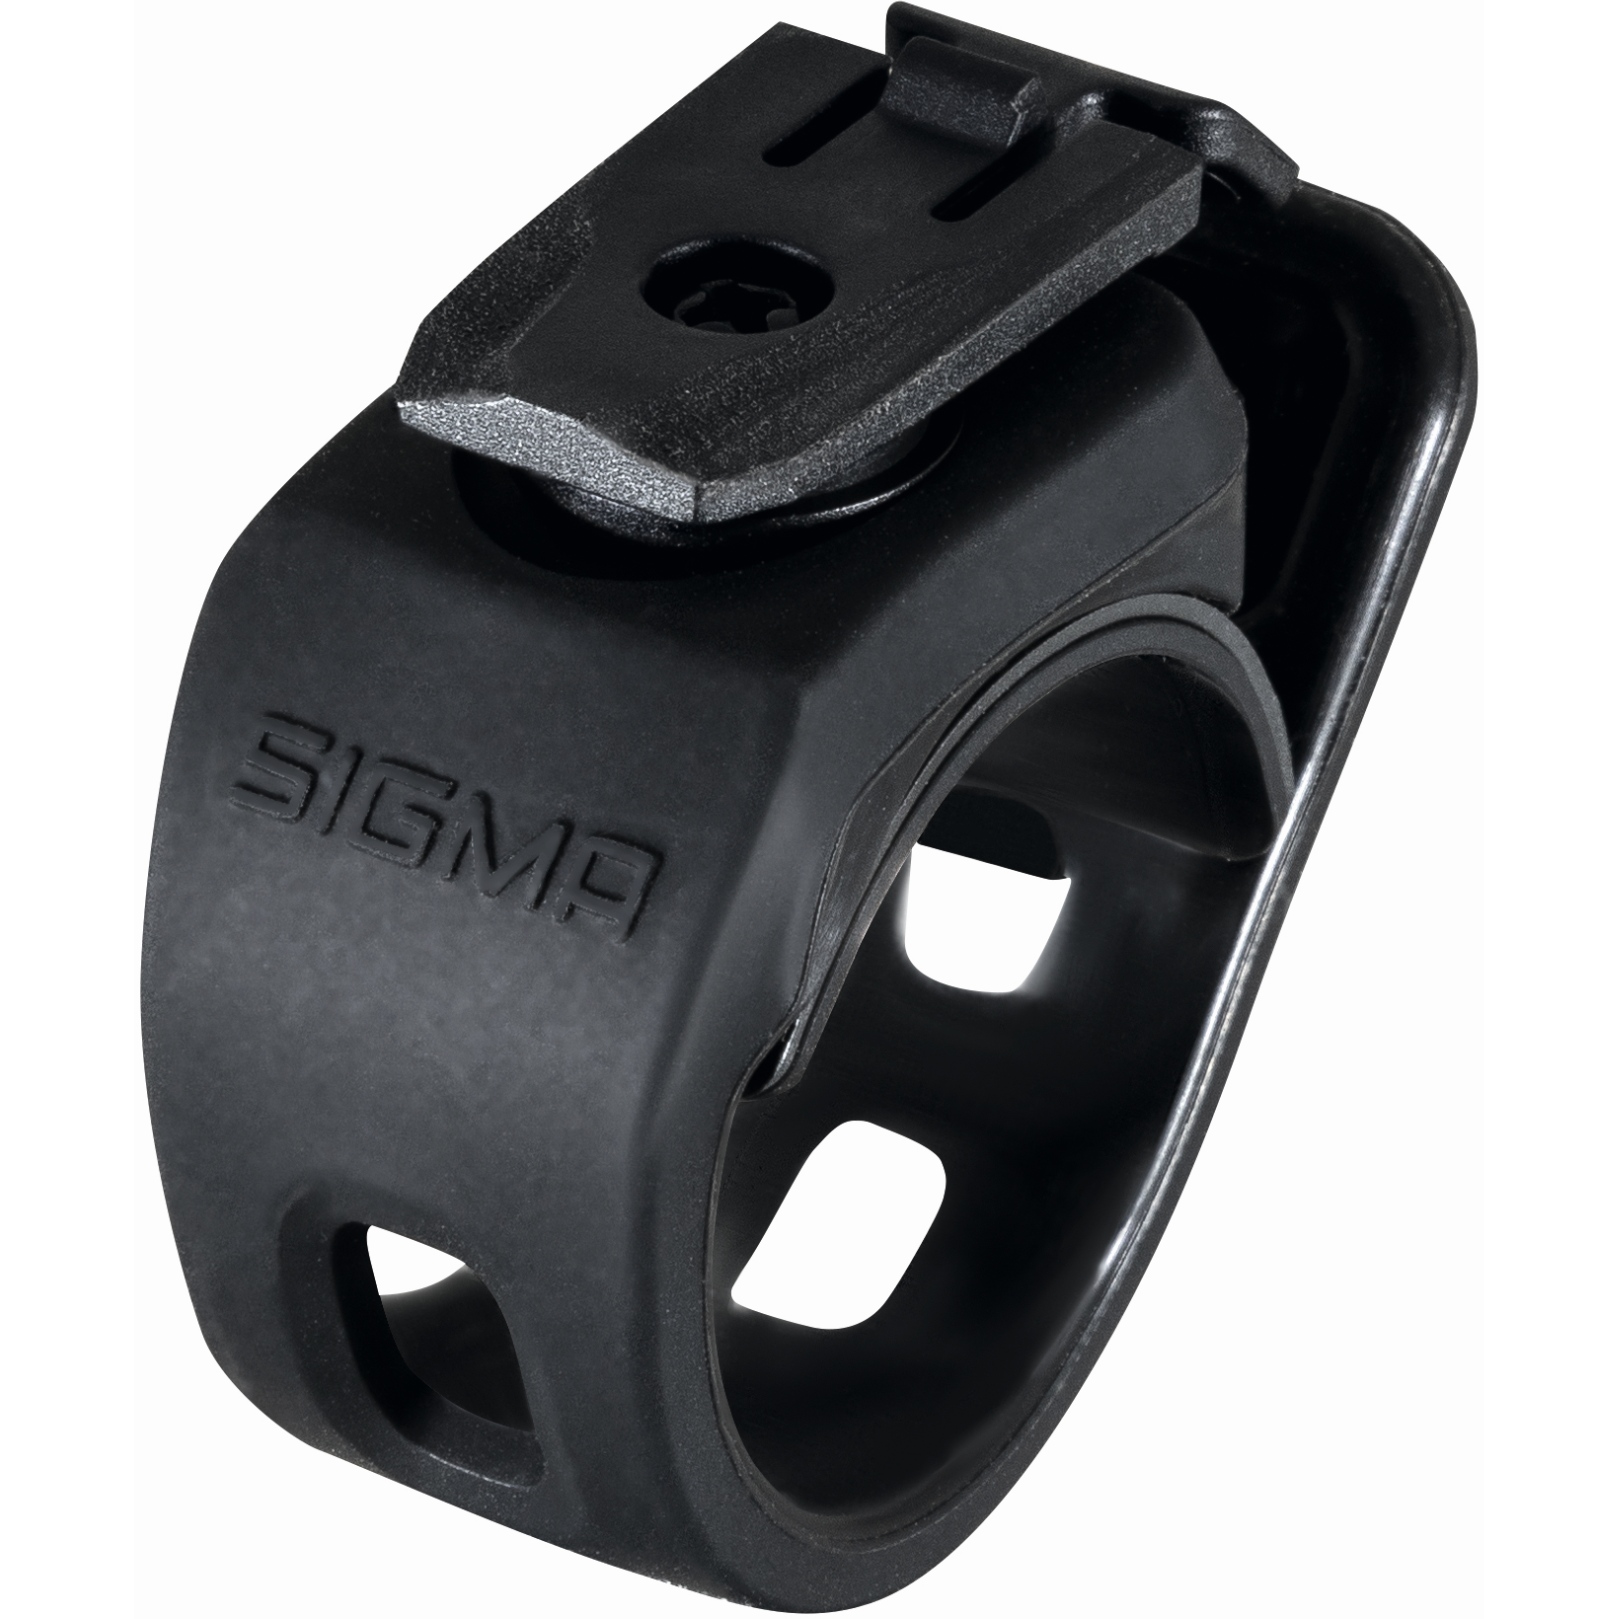 Picture of Sigma Sport Aura 100 Link Silicone Replacement Mount